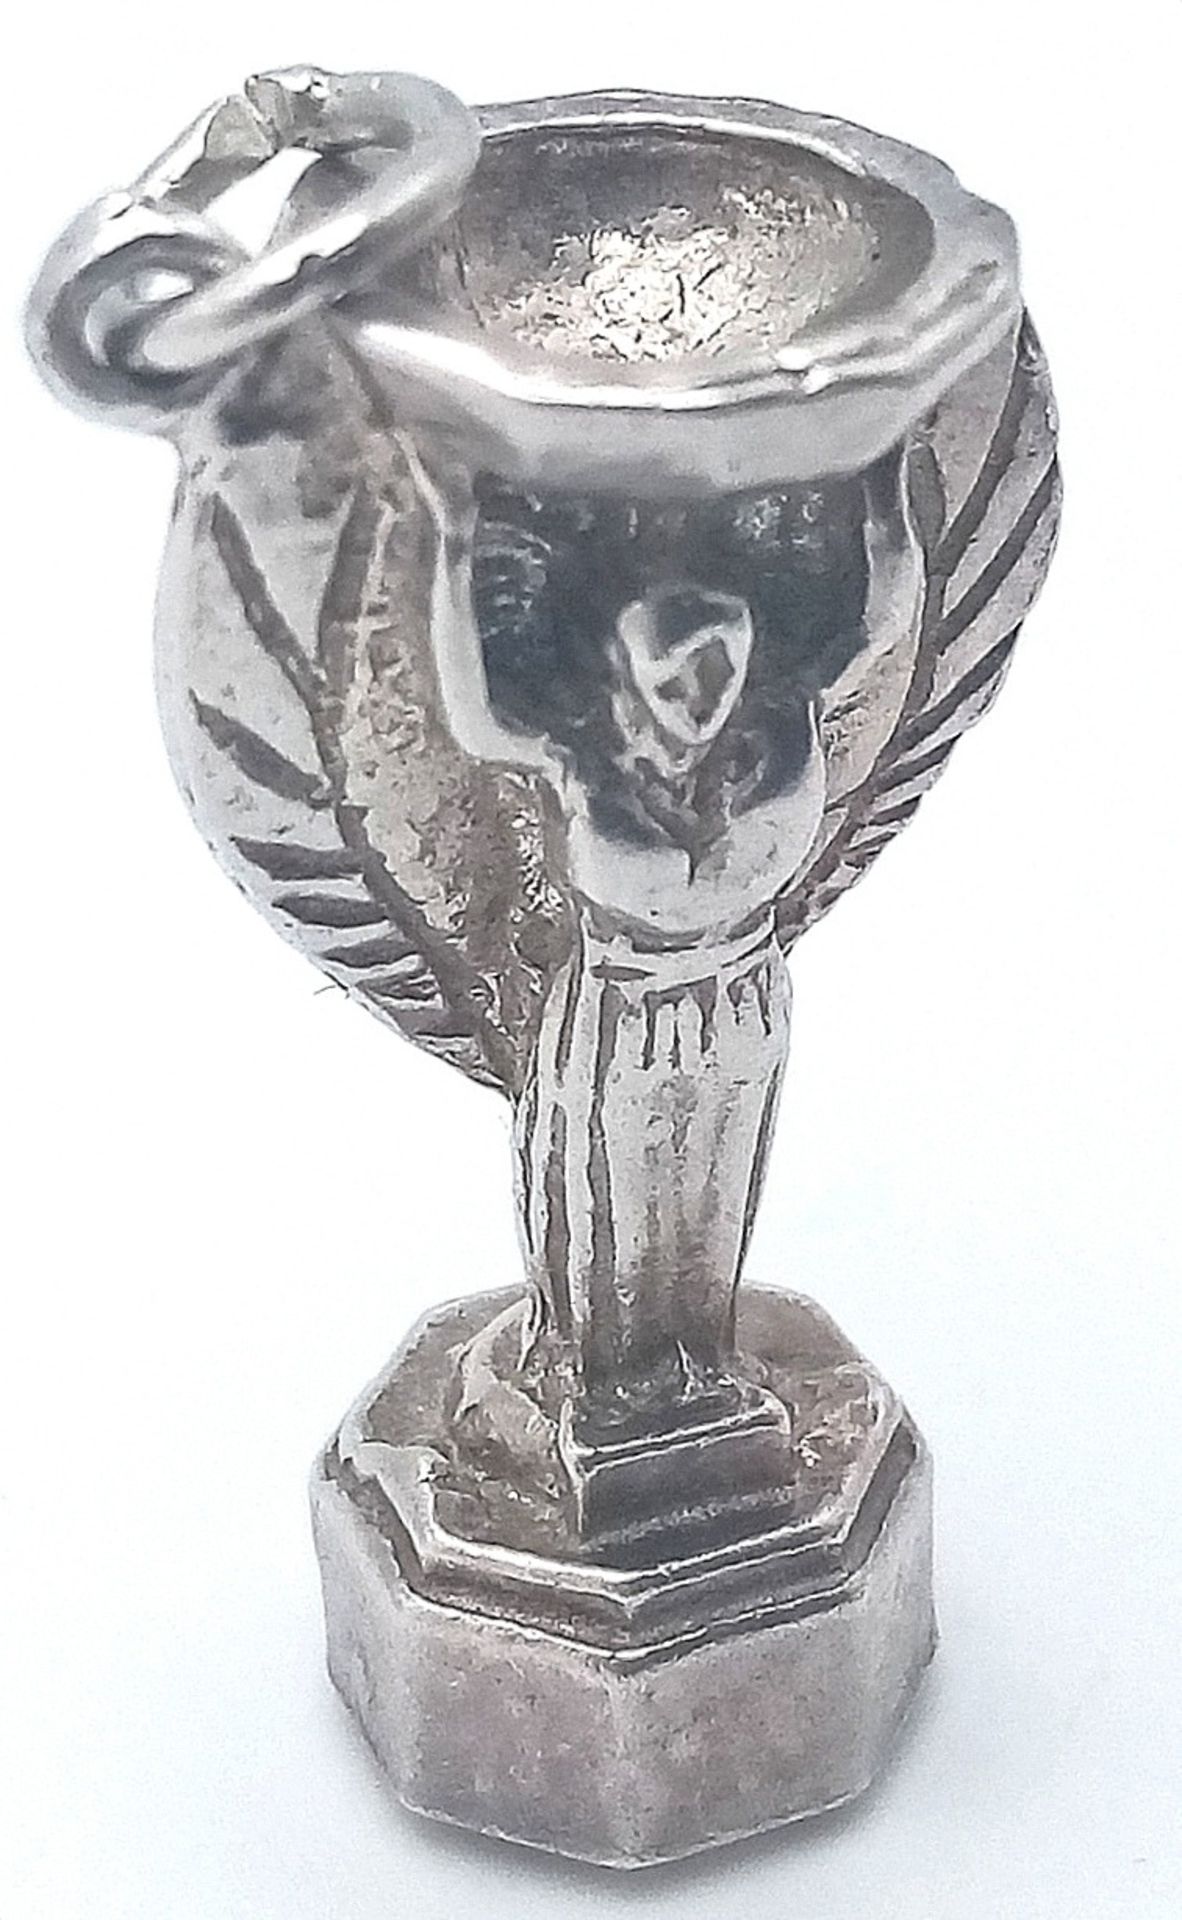 A STERLING SILVER JULES RIMET WORLD CUP TROPHY CHARM. 3cm length, 4.7g weight. Ref: SC 8101